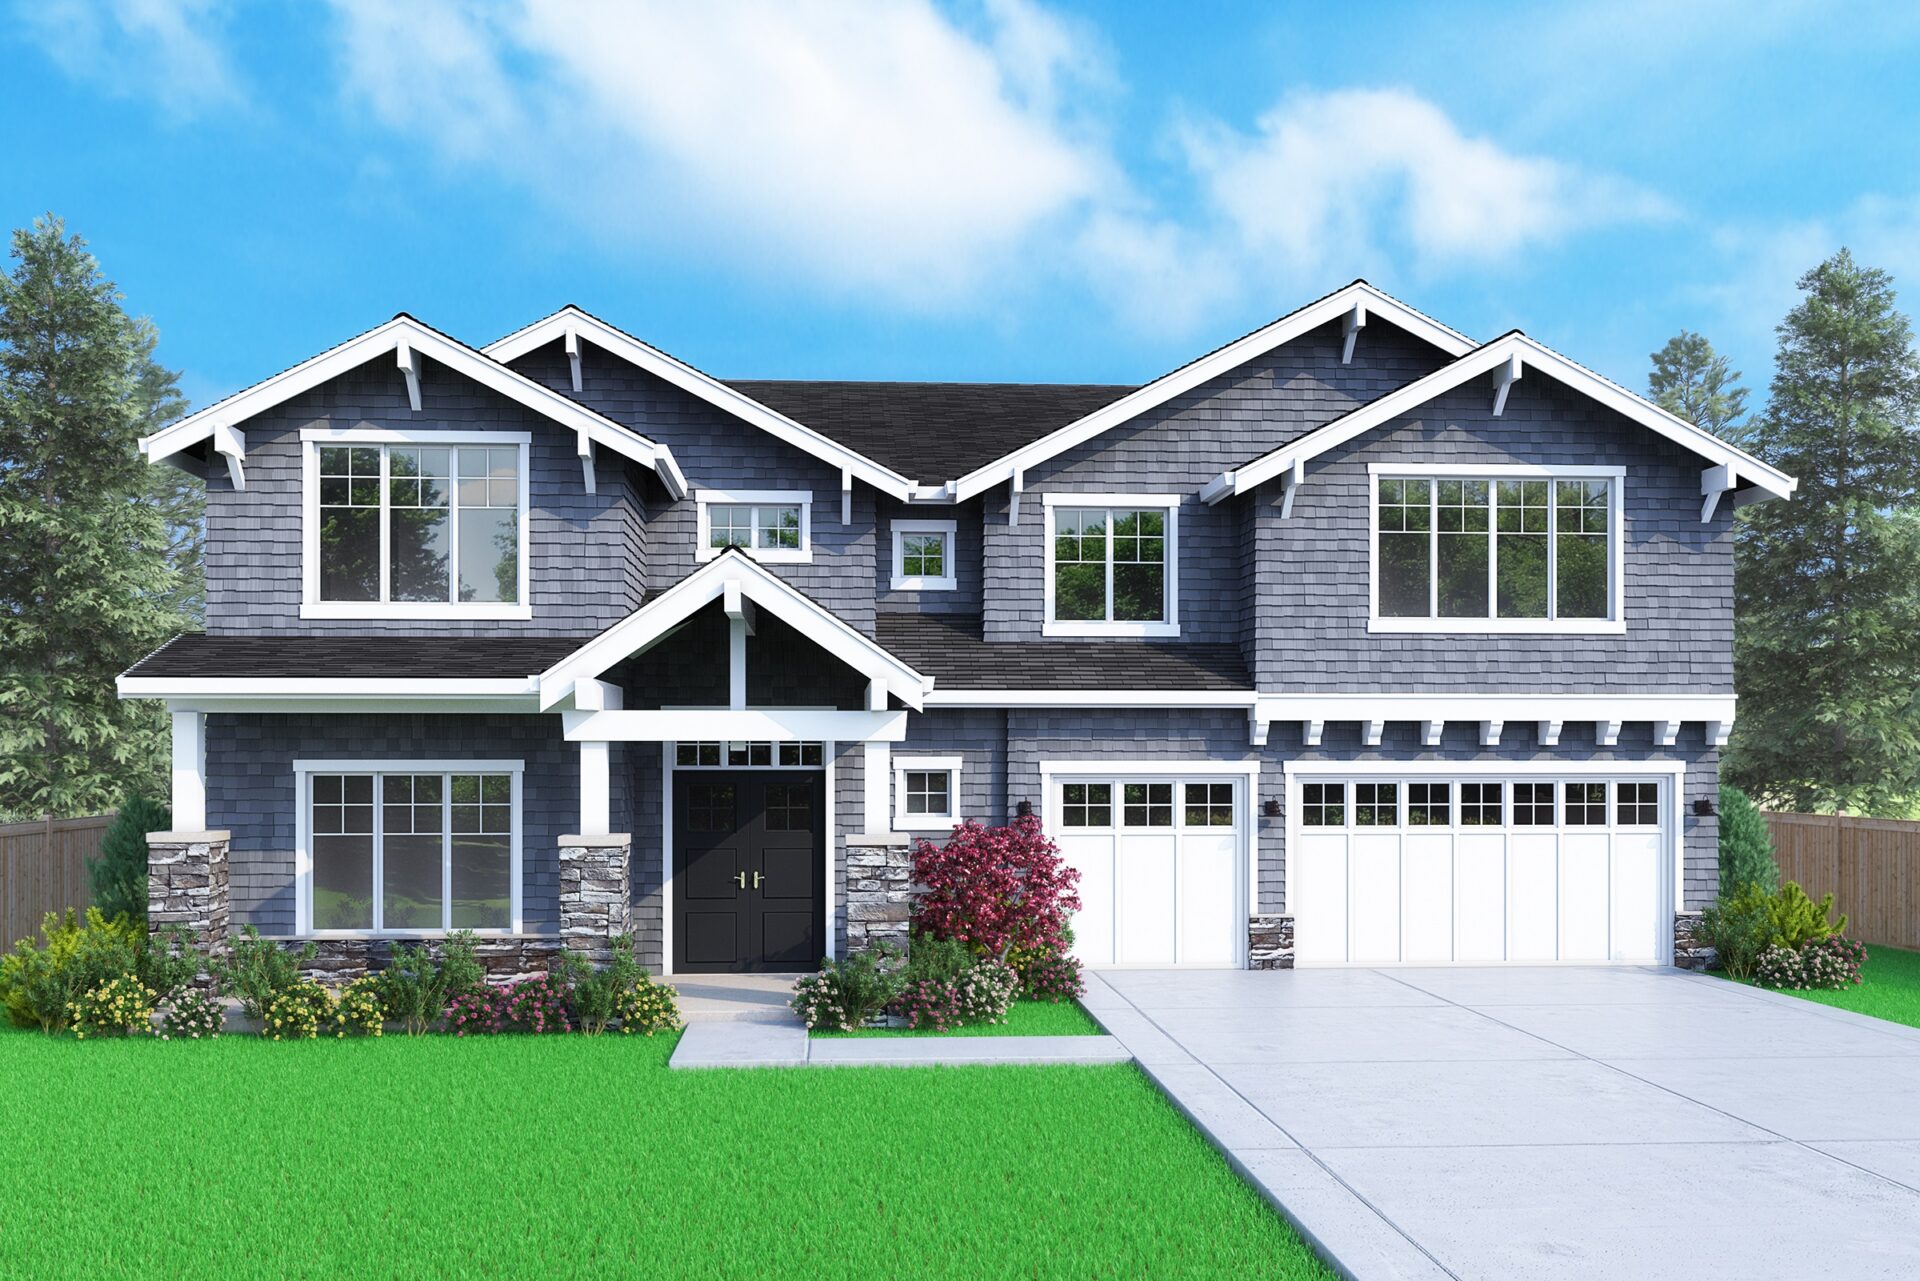 View our new luxury home construction on 12827 NE 113th St, in Kirkland, WA from MN Custom Home